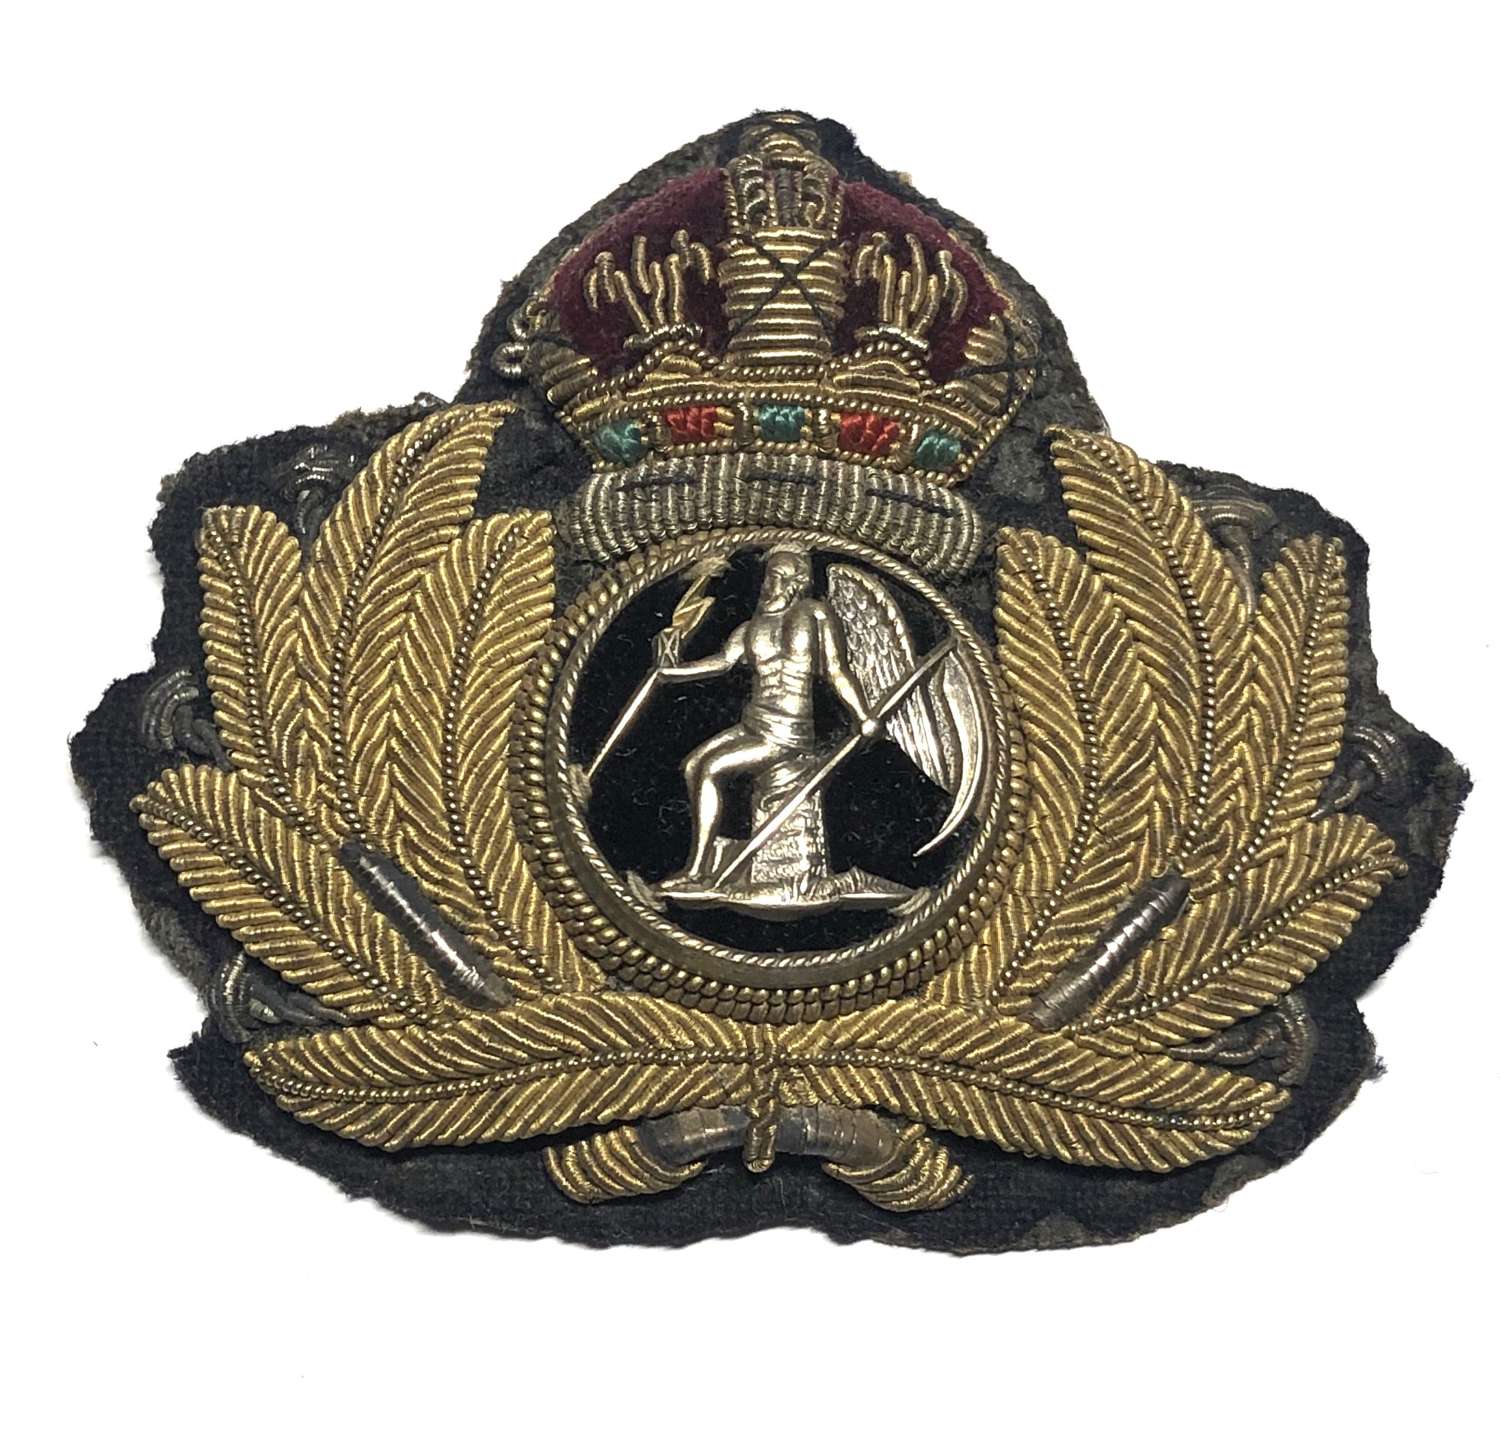 His Majesty's Telegraph Ship Cable Laying Officer's cap badge c1901-52